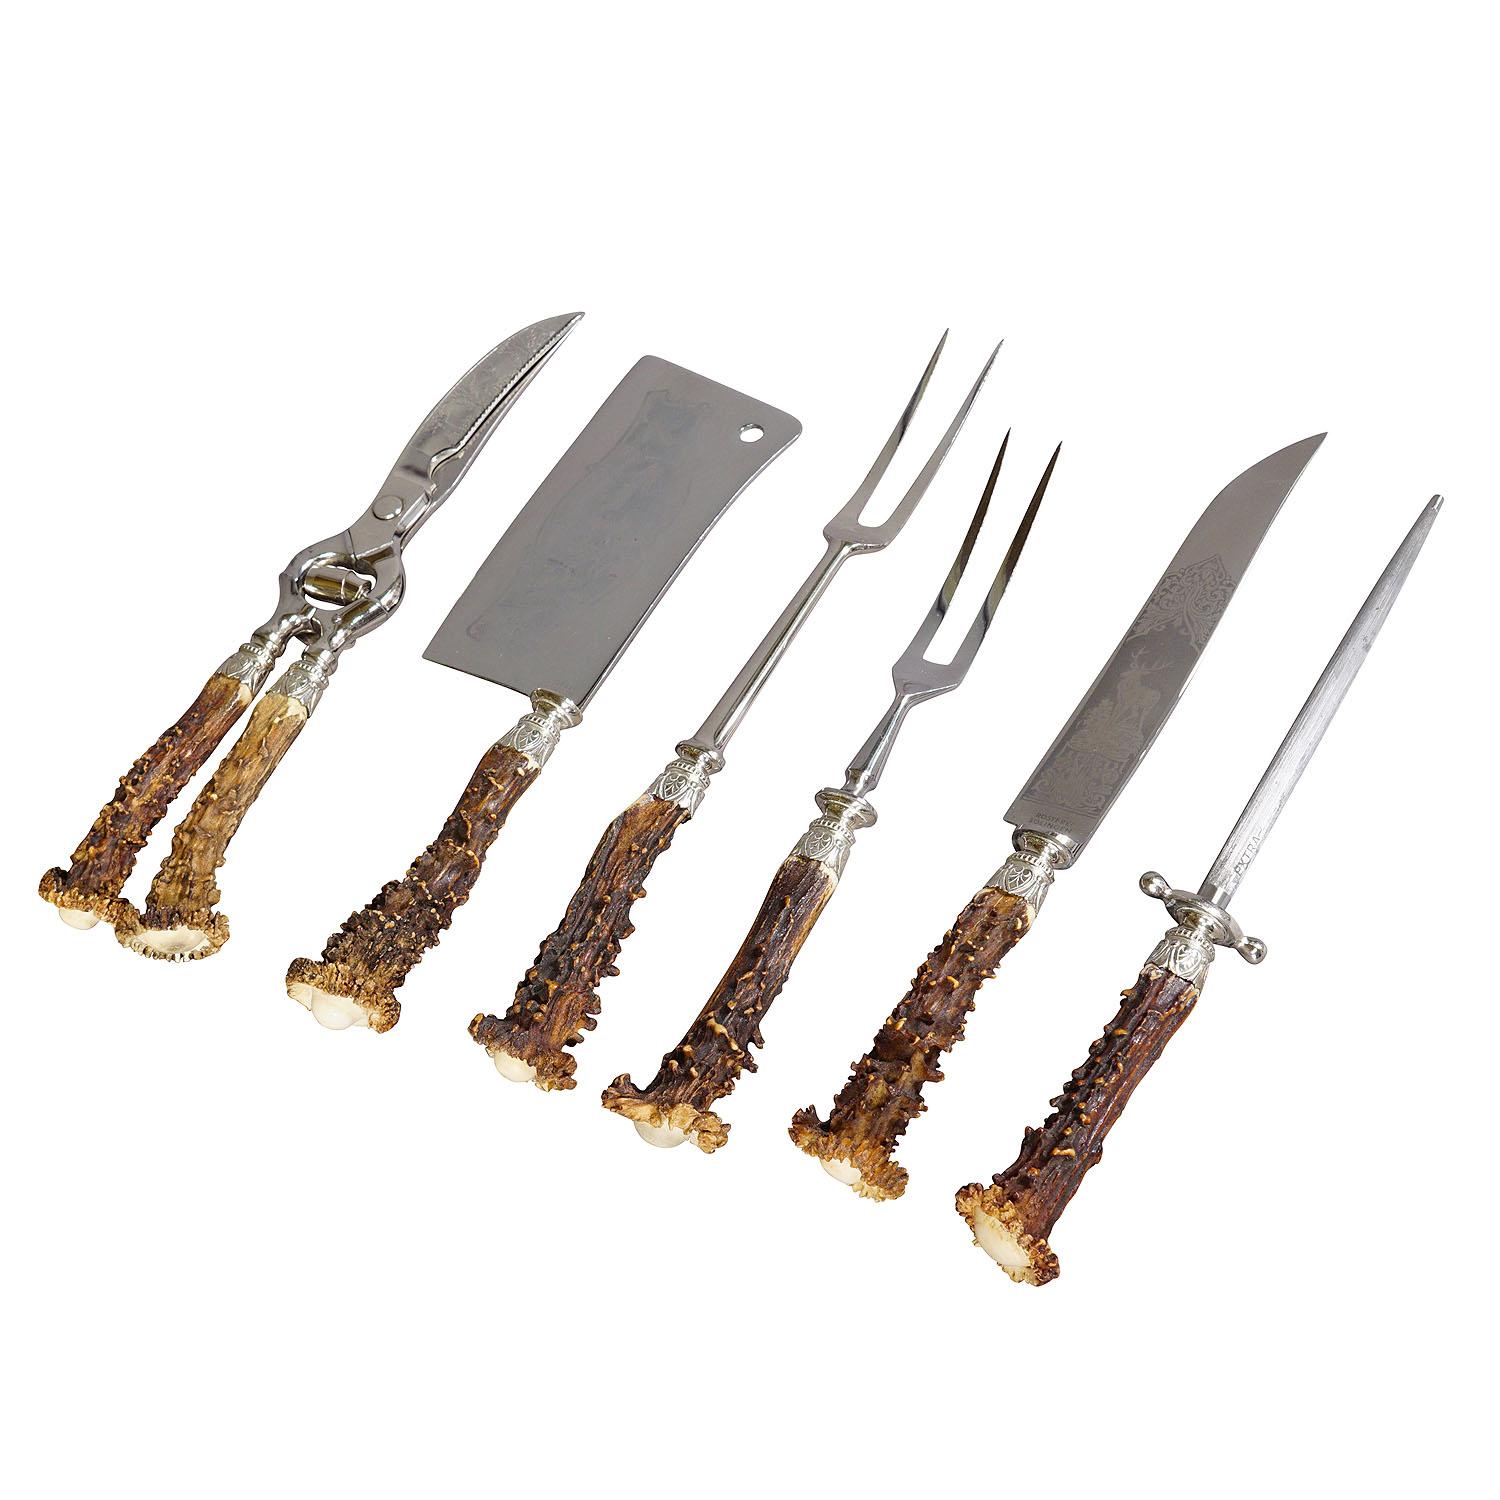 Vintage Six Pieces Deer Horn Carving Set Solingen, Germany 1960s

A rustic six pieces carving set consisting of 2 forks, knife, axe, wing shears and honing steel. The handles are made of genuine deer horn. Blades and forks made of stainles steel and